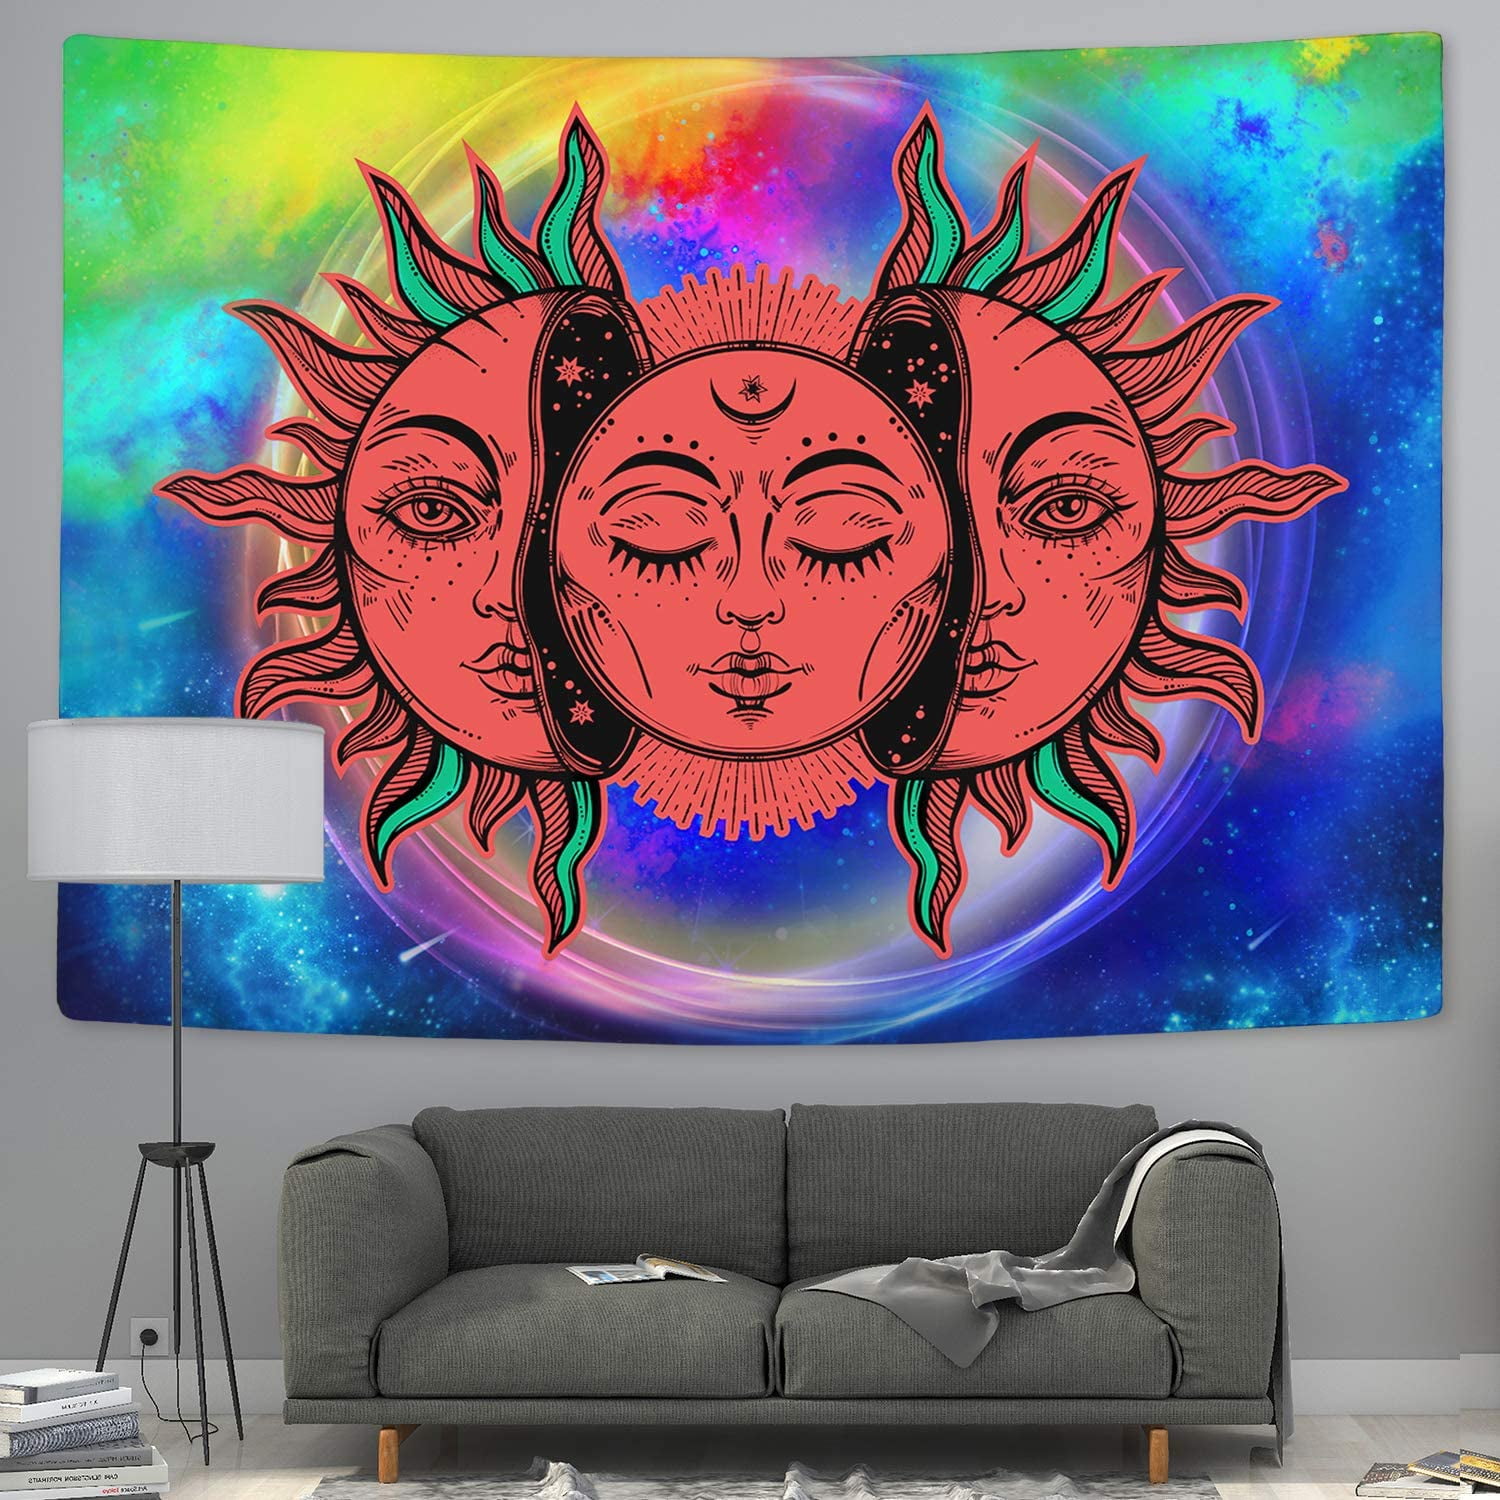 Sun And Moon Tapestry Burning Sun Tapestry Psychedelic Tapestry With Stars Color Ful Mystic Tapestry Wall Hanging For Room 59 1 X 59 1 Inches Walmart Com